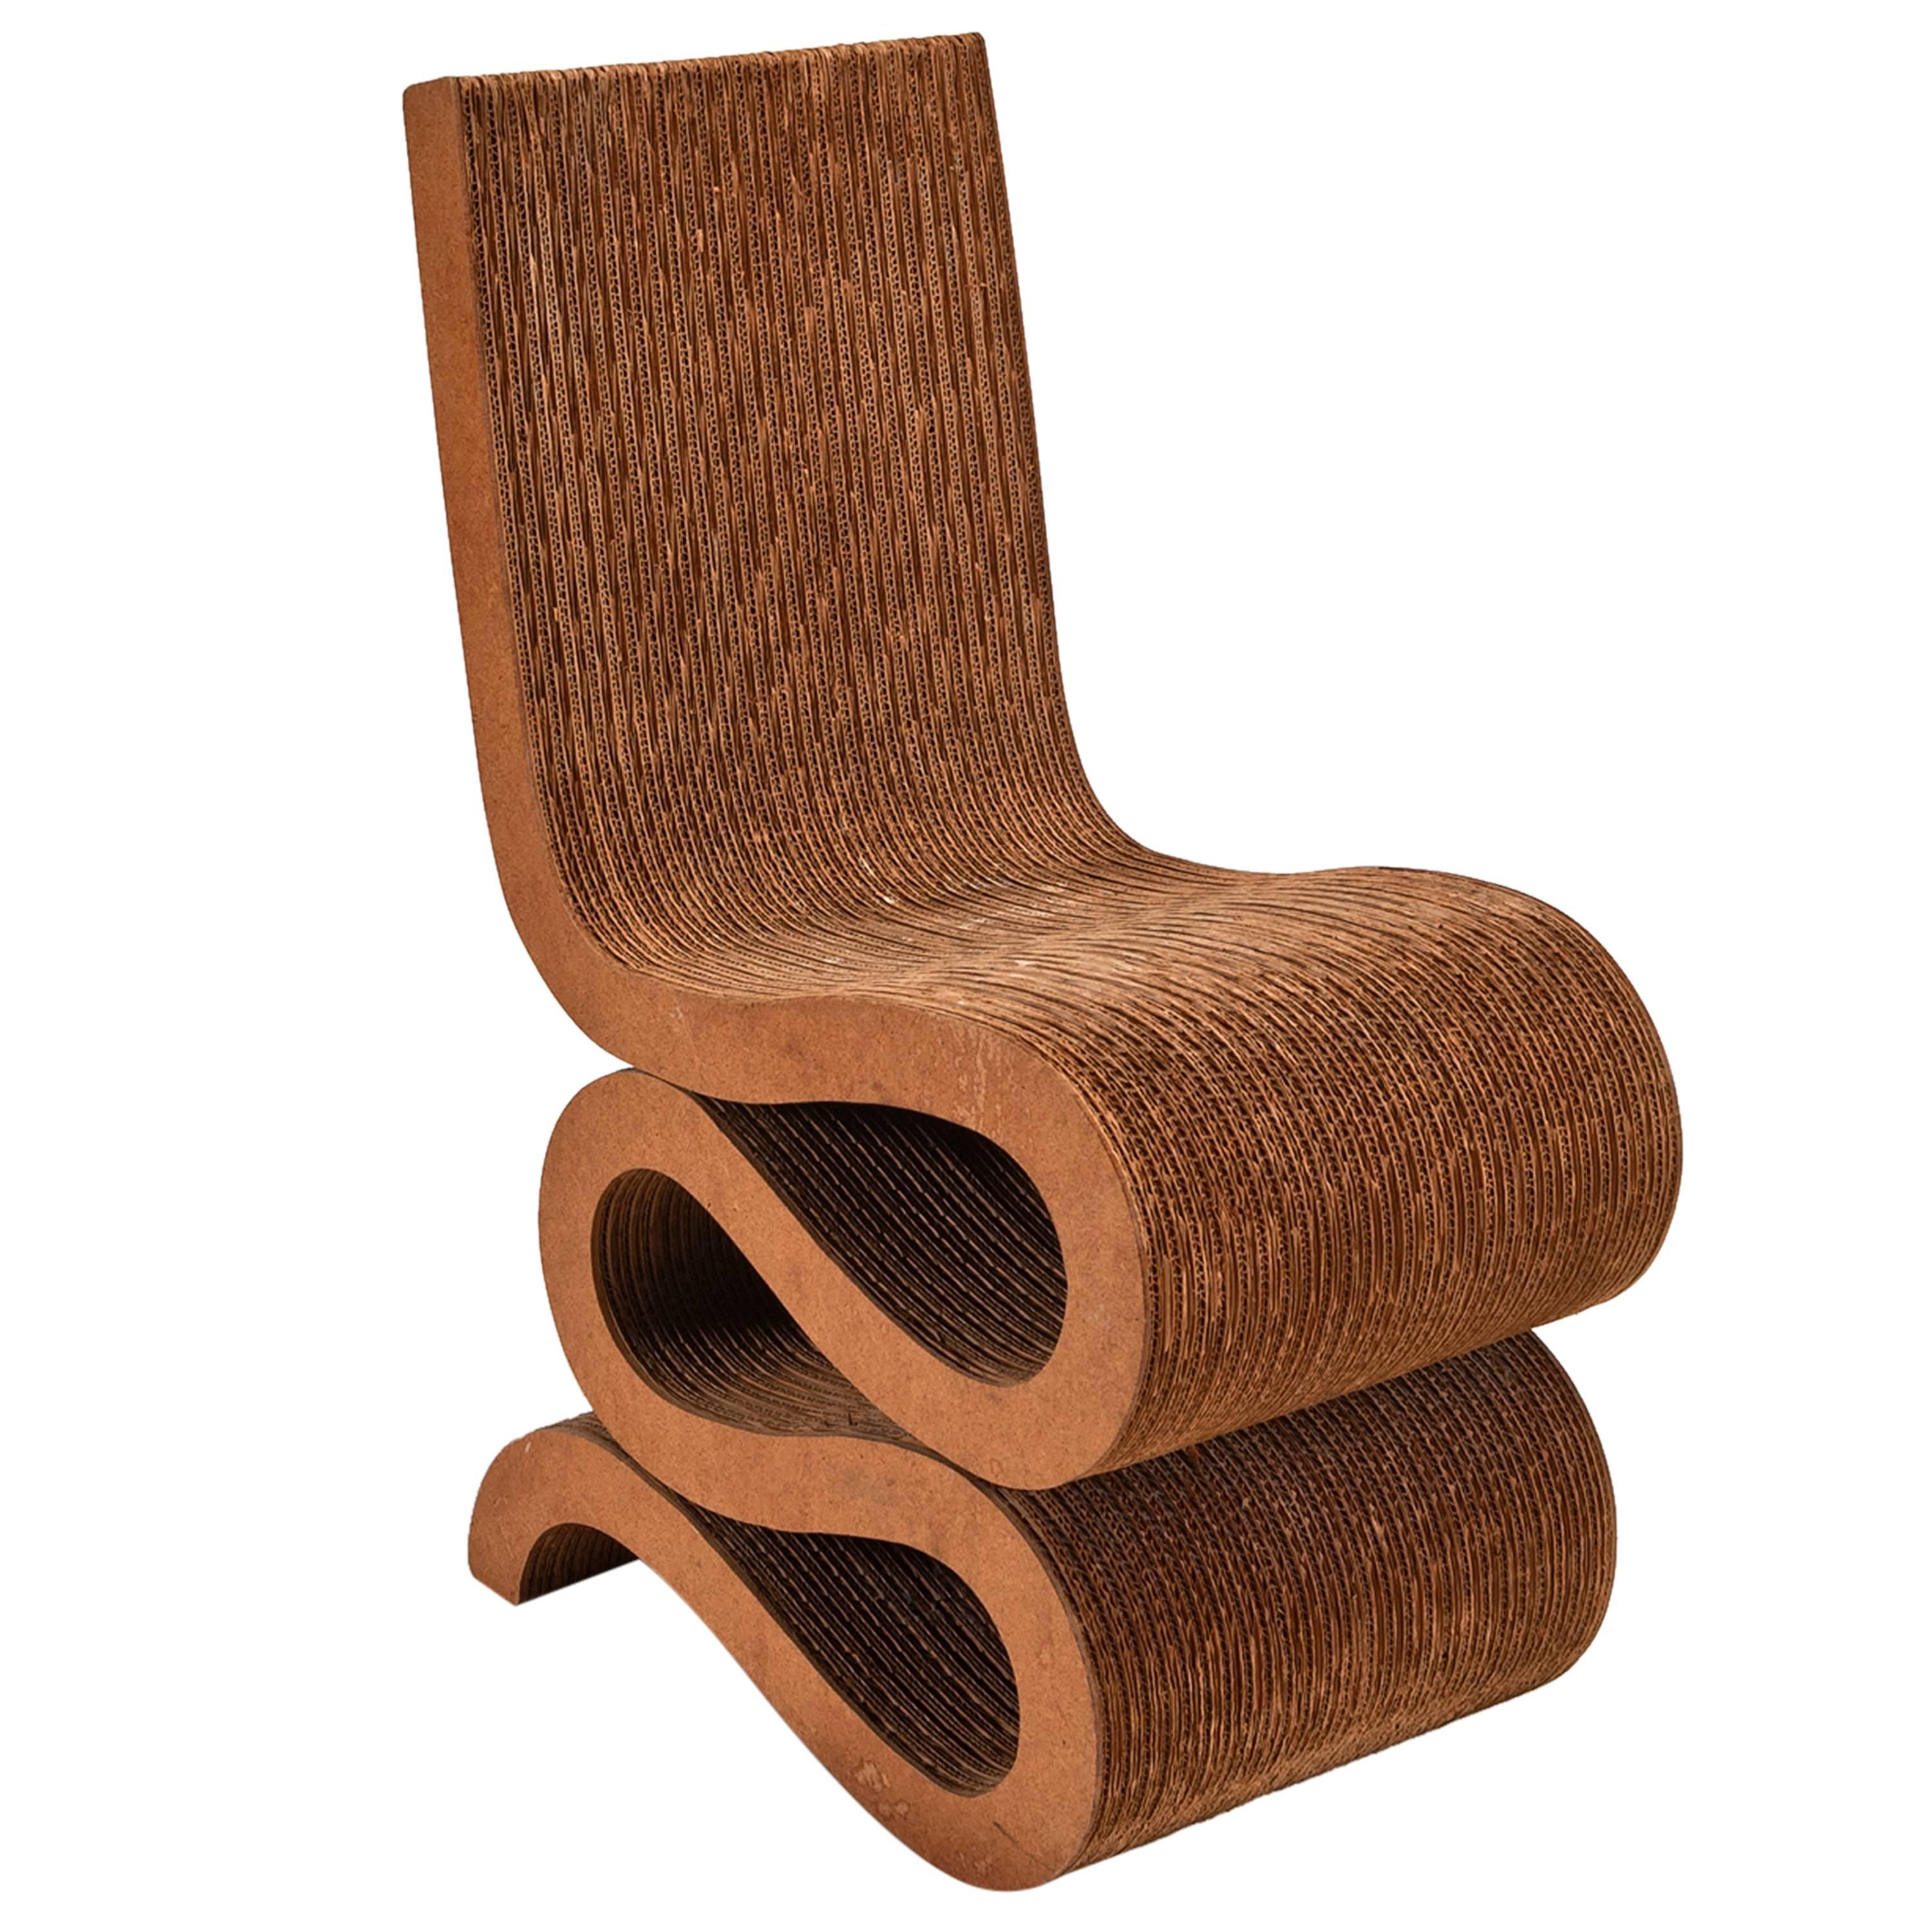 Wiggle Chair by Frank O. Gehry: Special Edition for Bloomingdale's